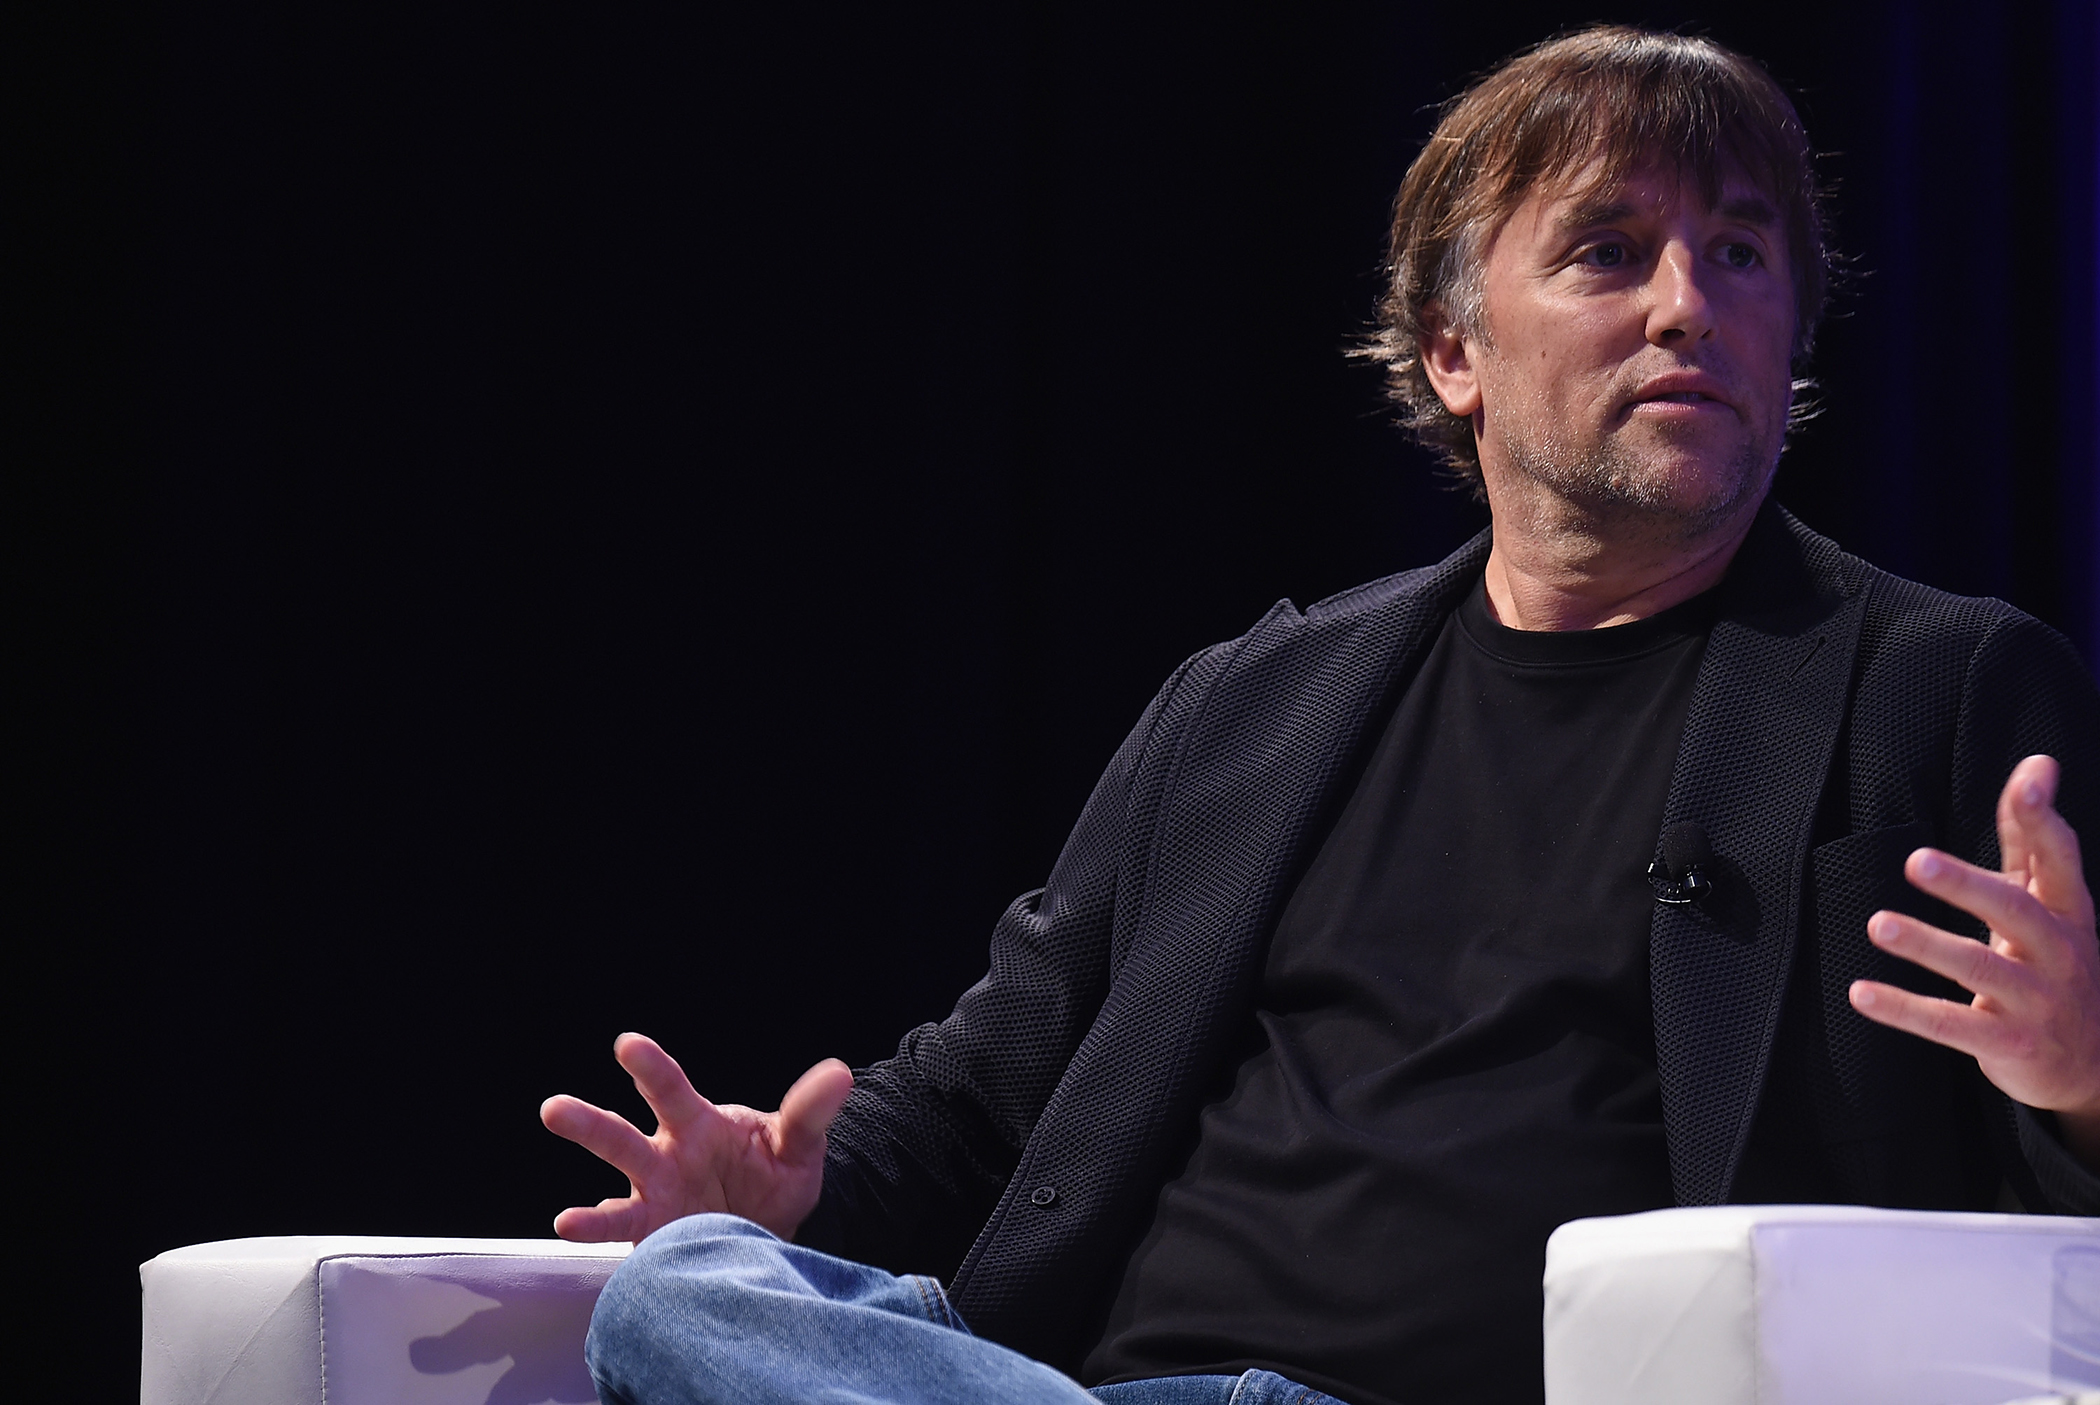 Filmmaker Richard Linklater takes part in the Made in Austin: A Look Into 